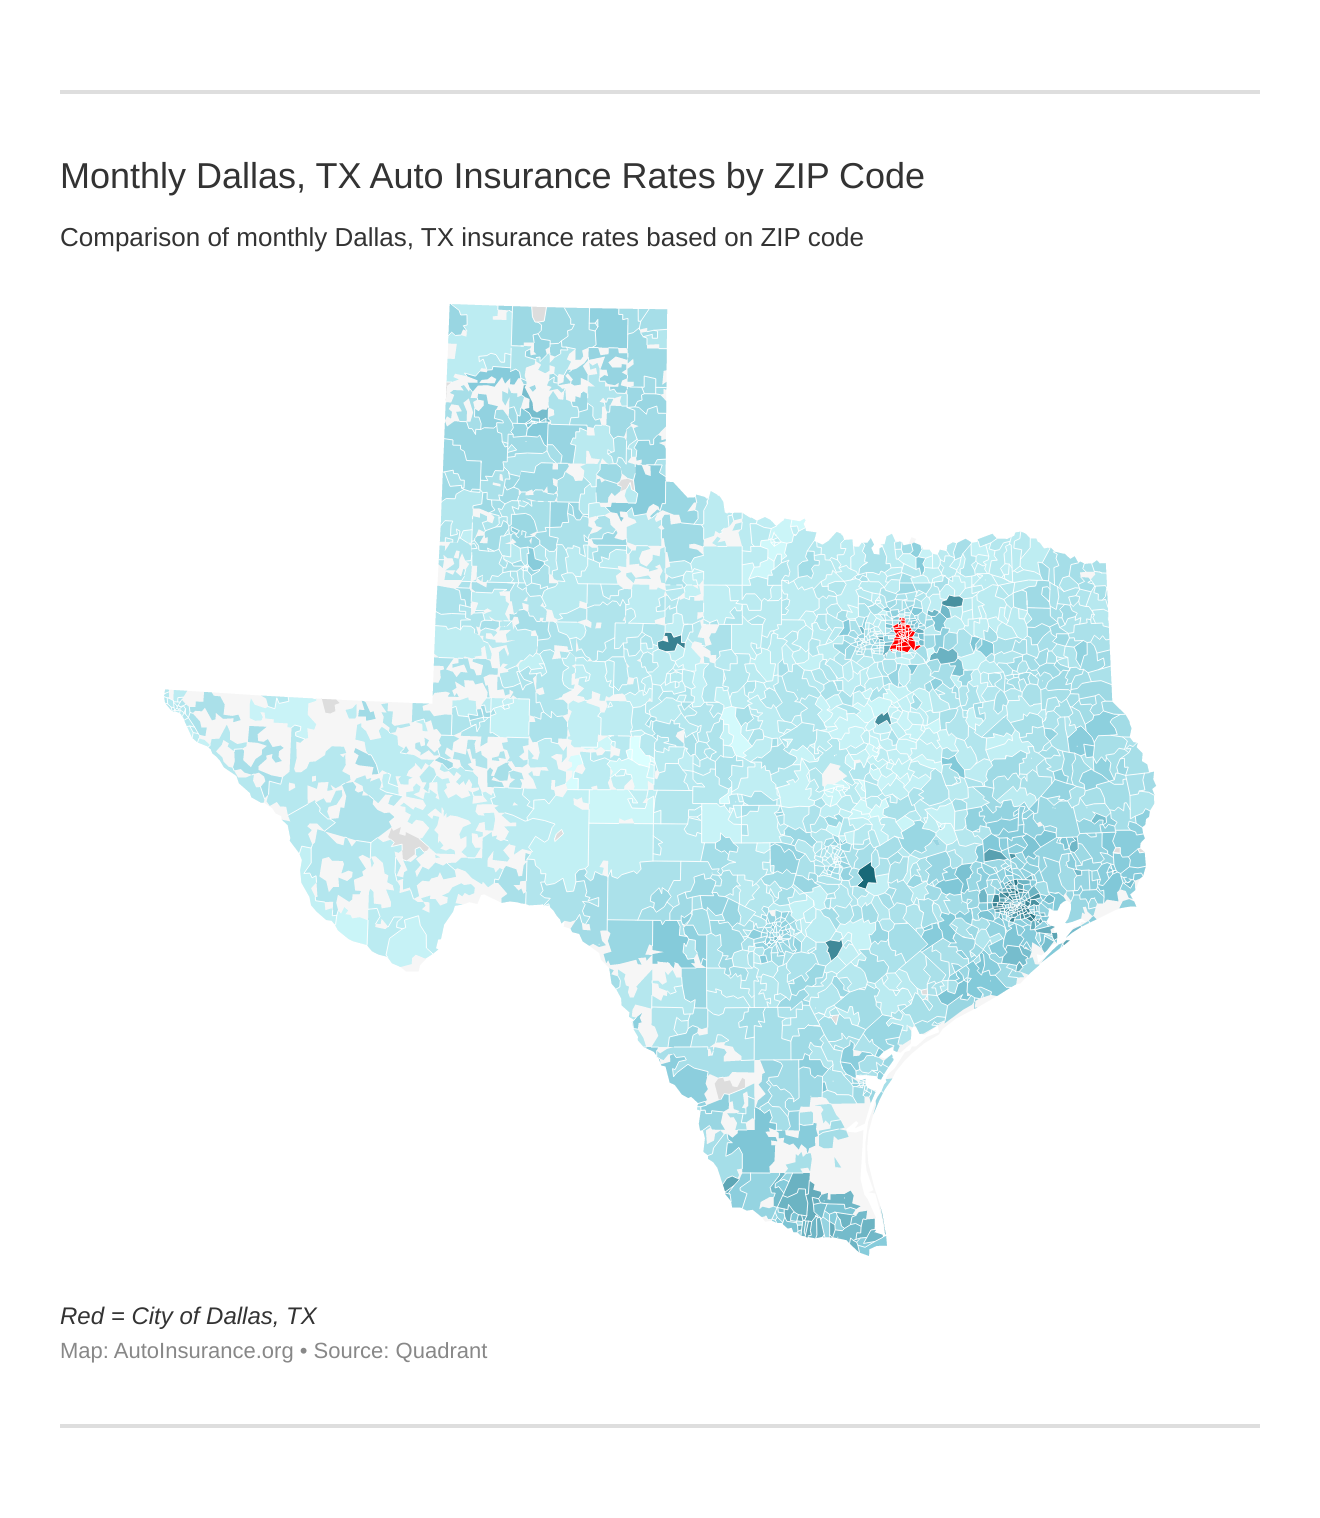 Monthly Dallas, TX Auto Insurance Rates by ZIP Code